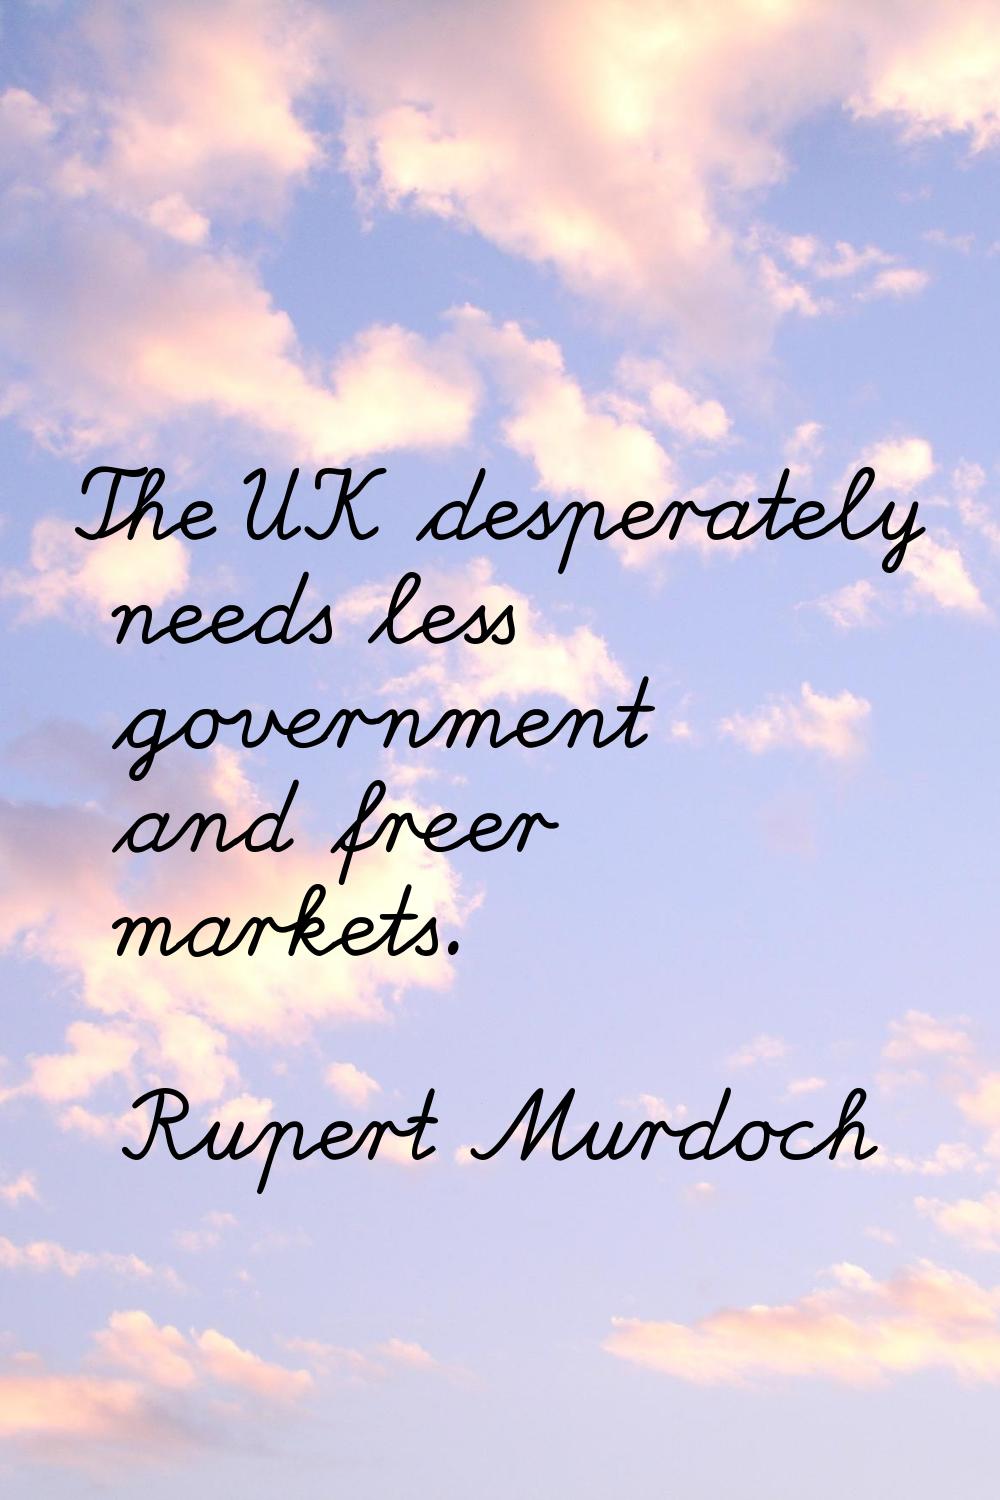 The UK desperately needs less government and freer markets.